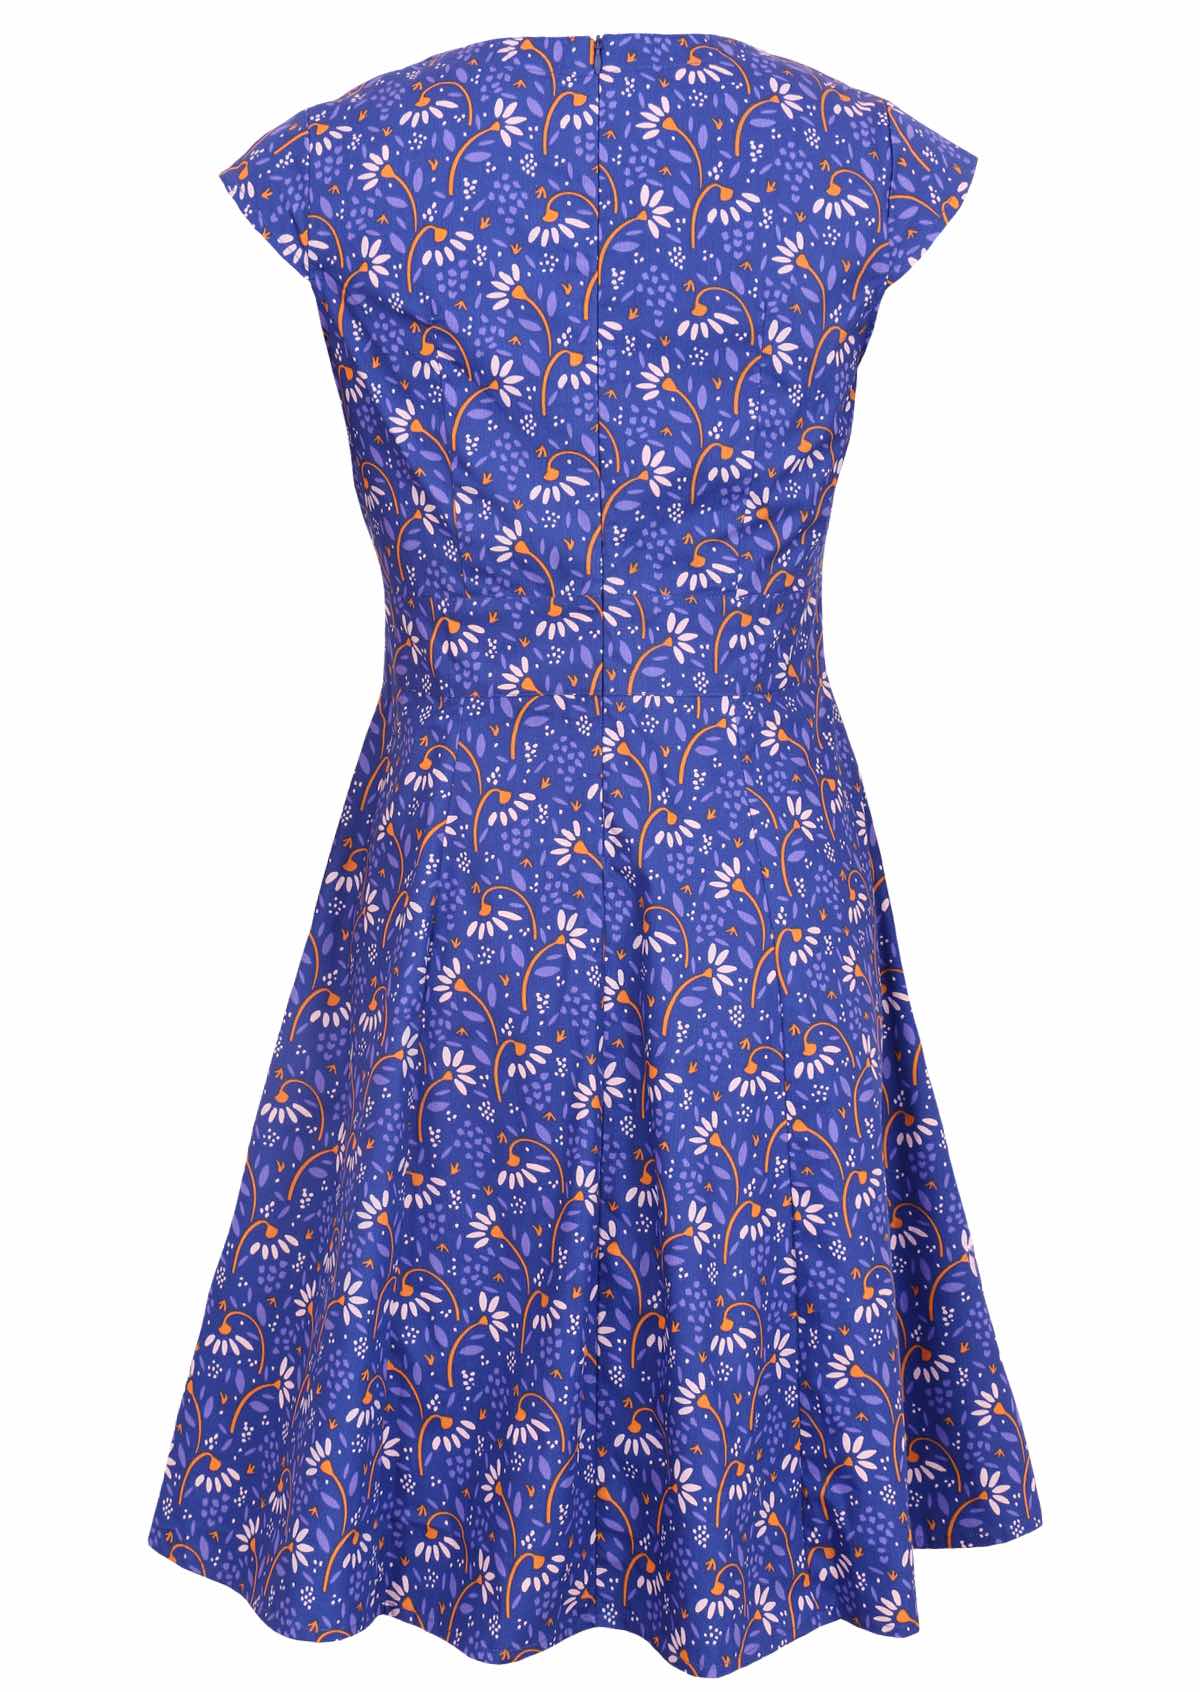 Retro dress with cap sleeves and generous A-line skirt